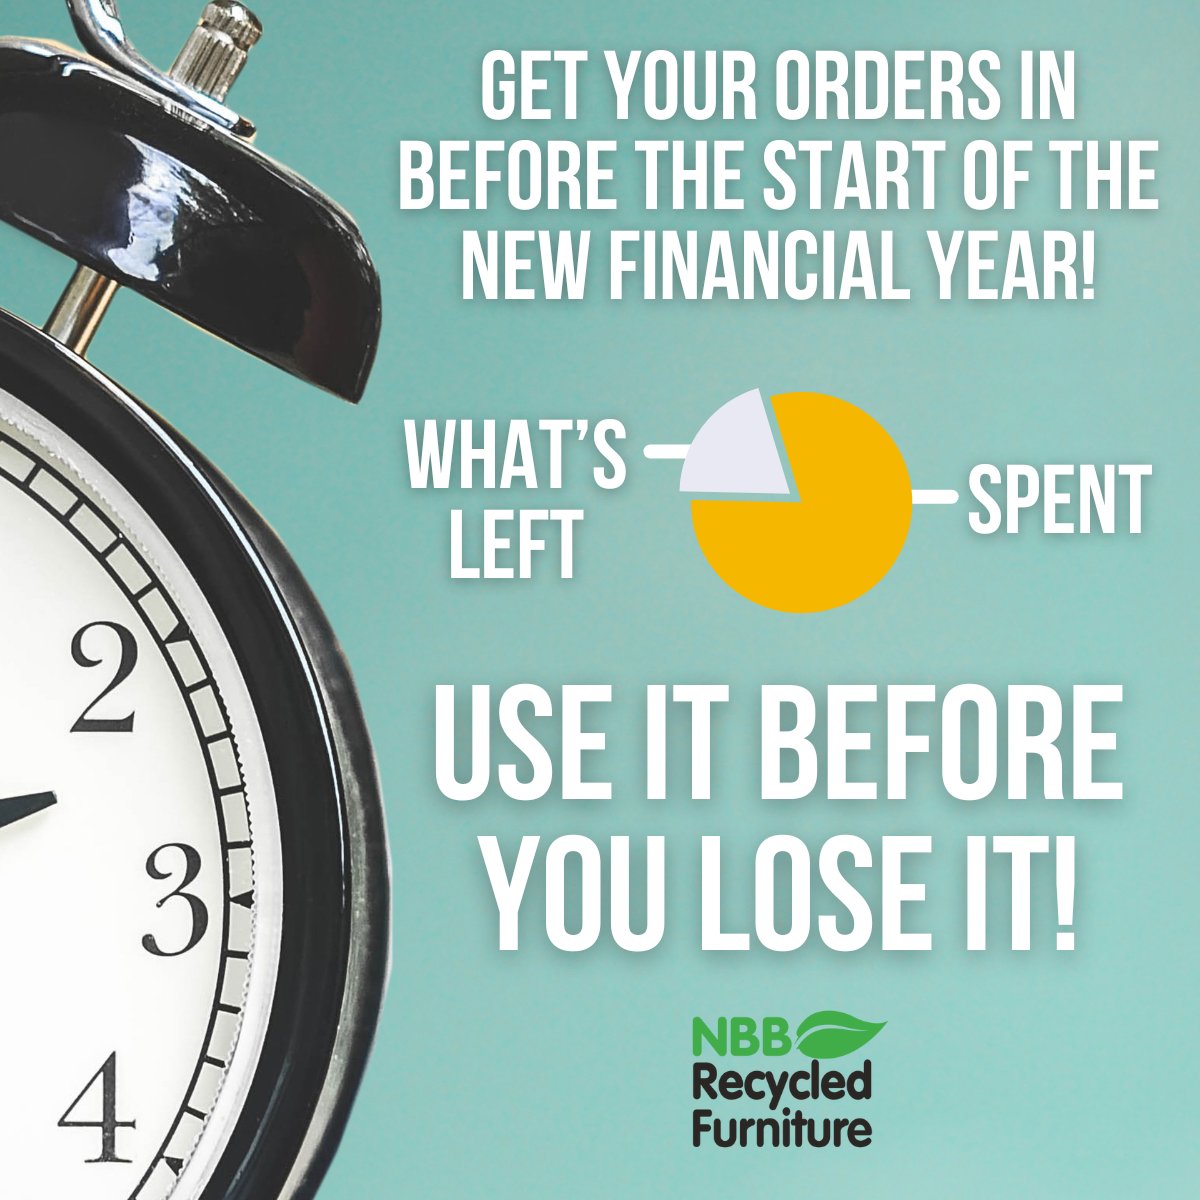 Do you have any of your yearly budget left? Make sure to get your orders in before the 5th of April 2024 and capitalise on any unspent funds! recycledfurniture.co.uk #NBBRecycledFurniture #yearlybudget #outdoorfurniture #bins #picnictables #benches #playground #fencing #easter